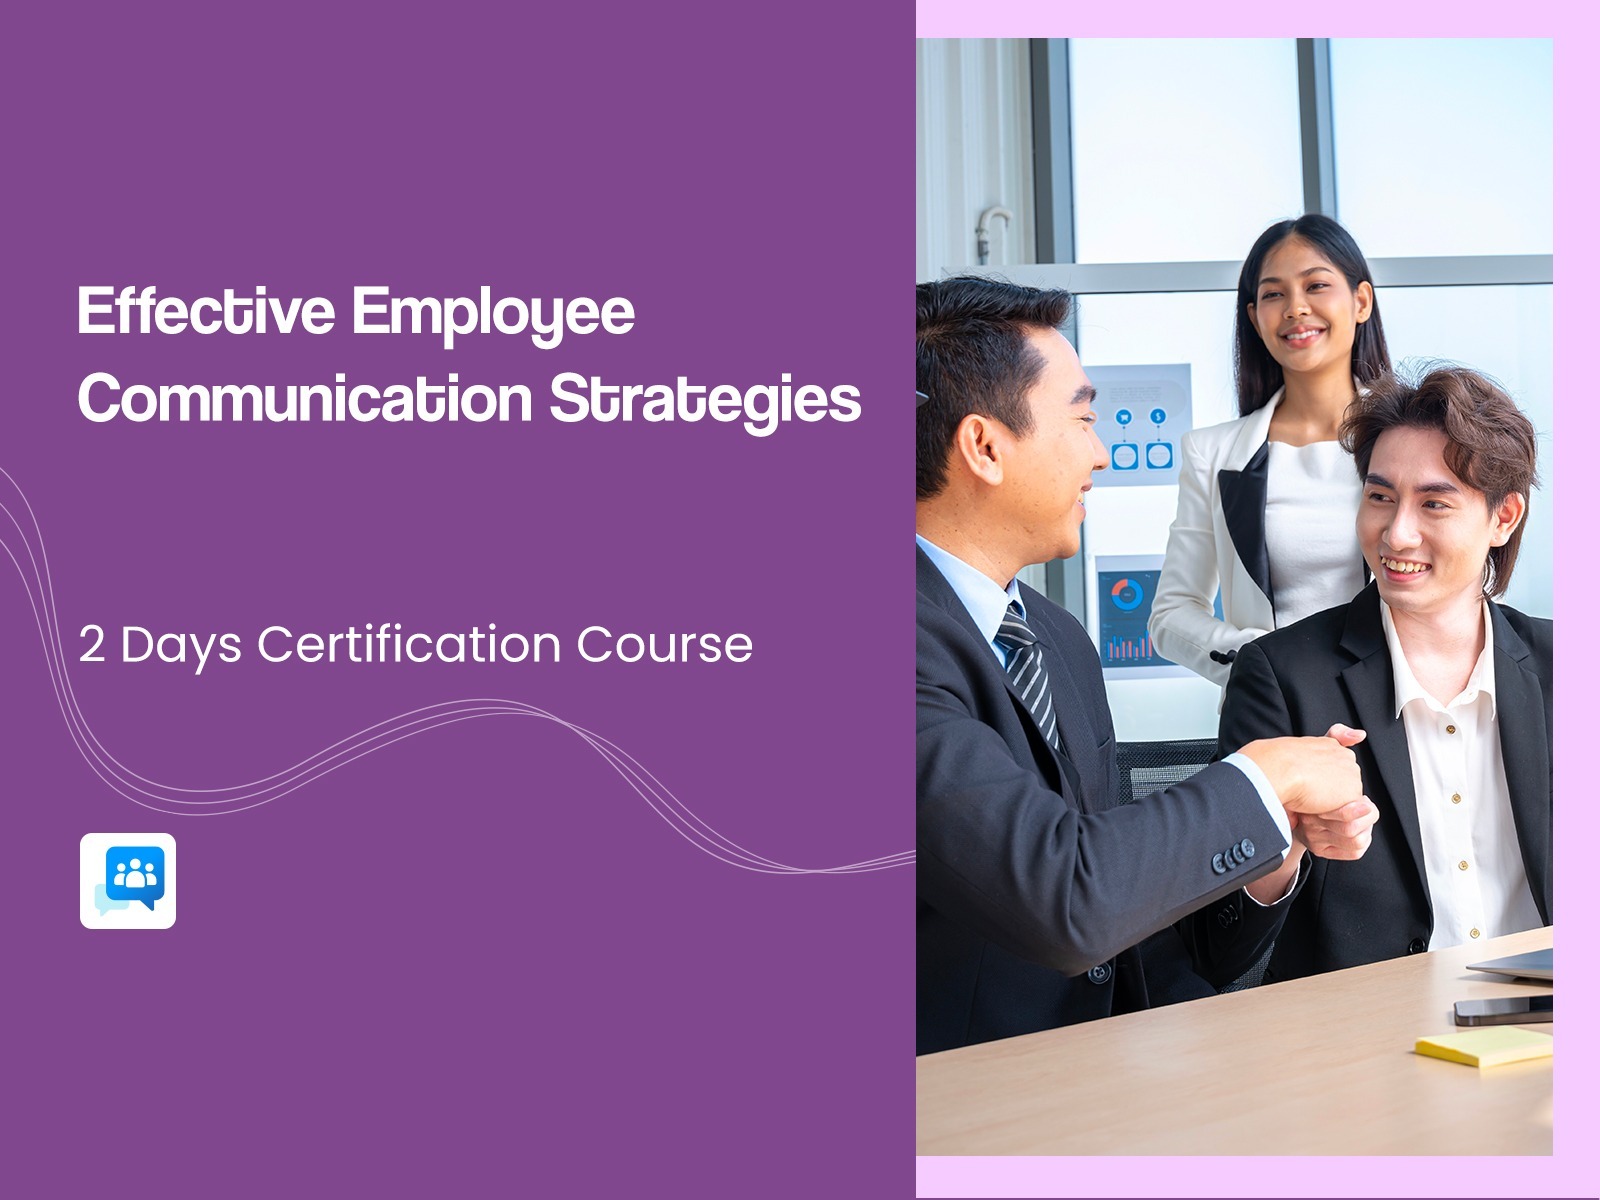 Effective Employee Communication Strategies course in Singapore